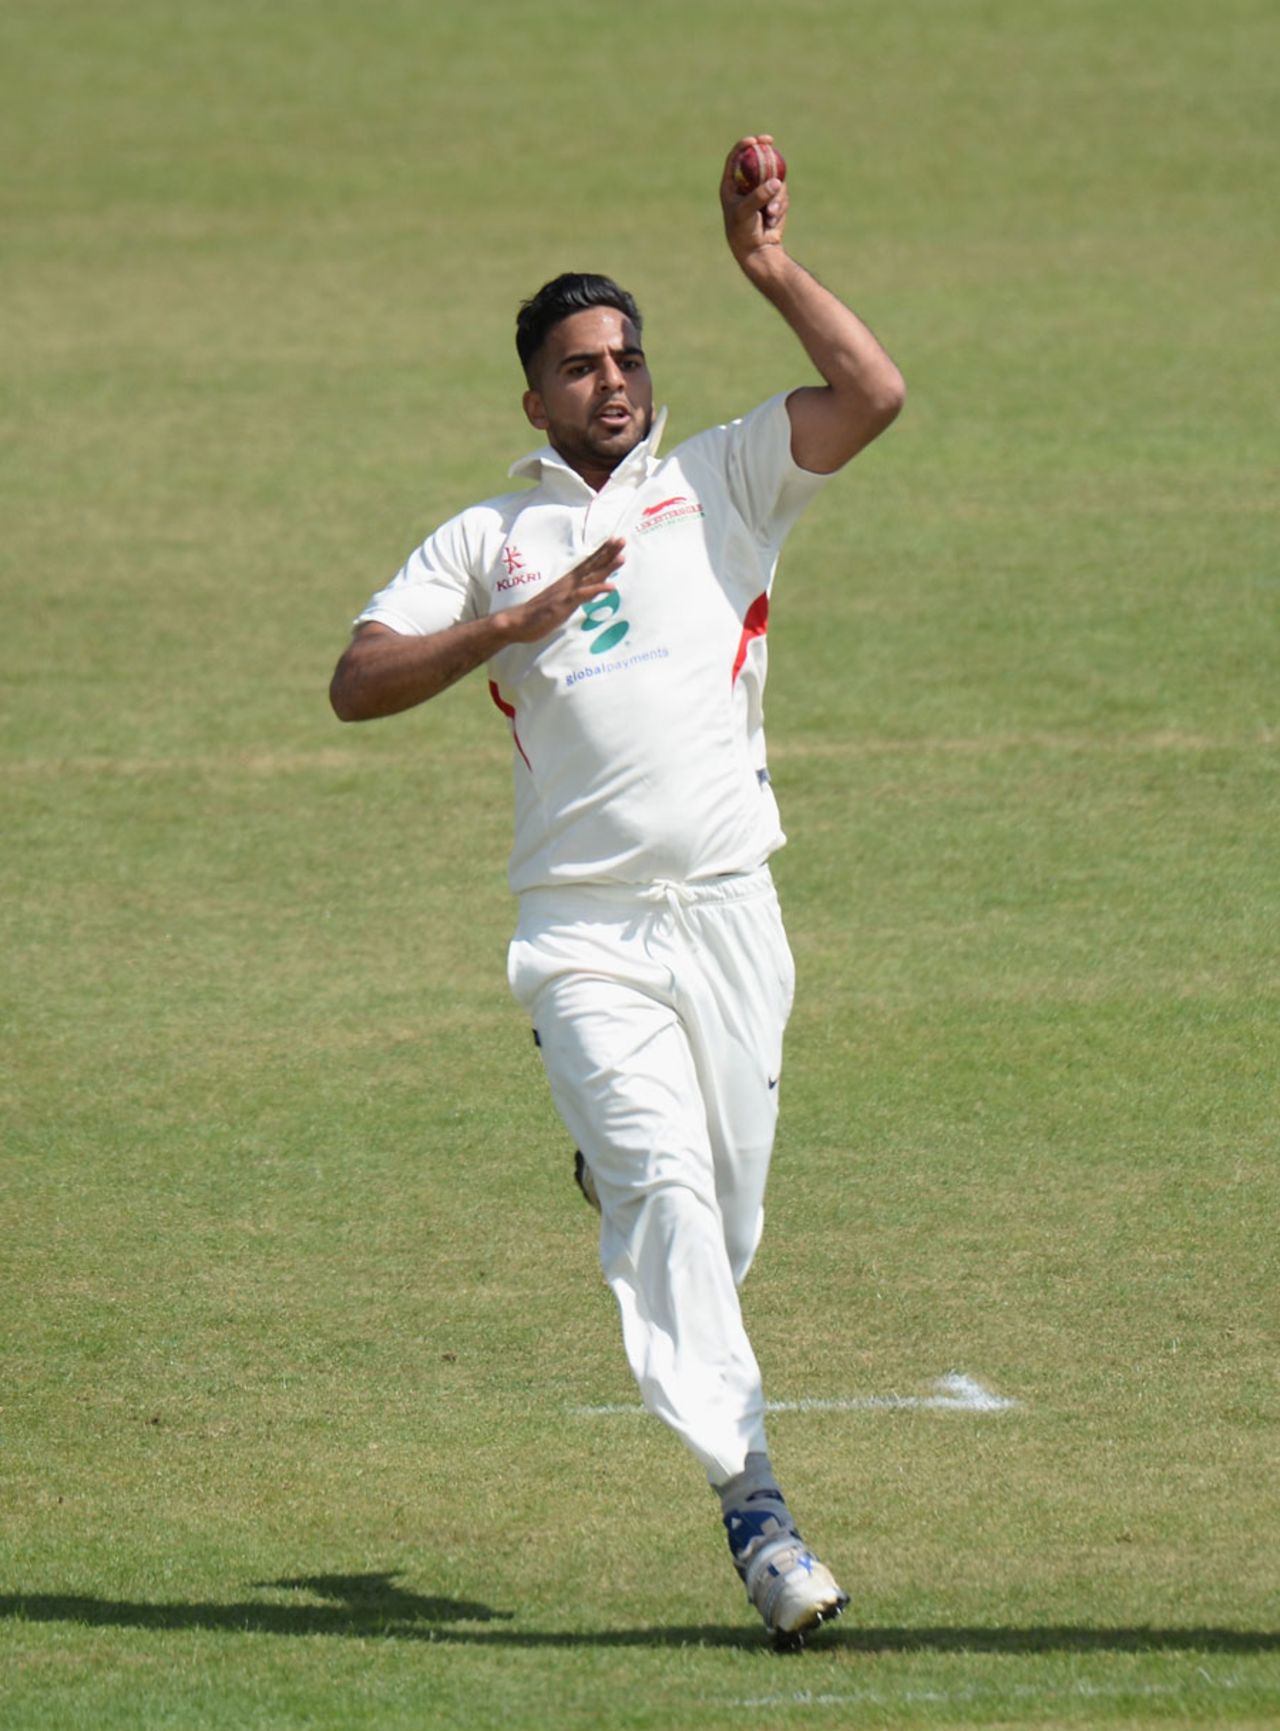 Atif Sheikh has a bowl, Leicestershire v Indians, Leicester, 1st day, June 26, 2014